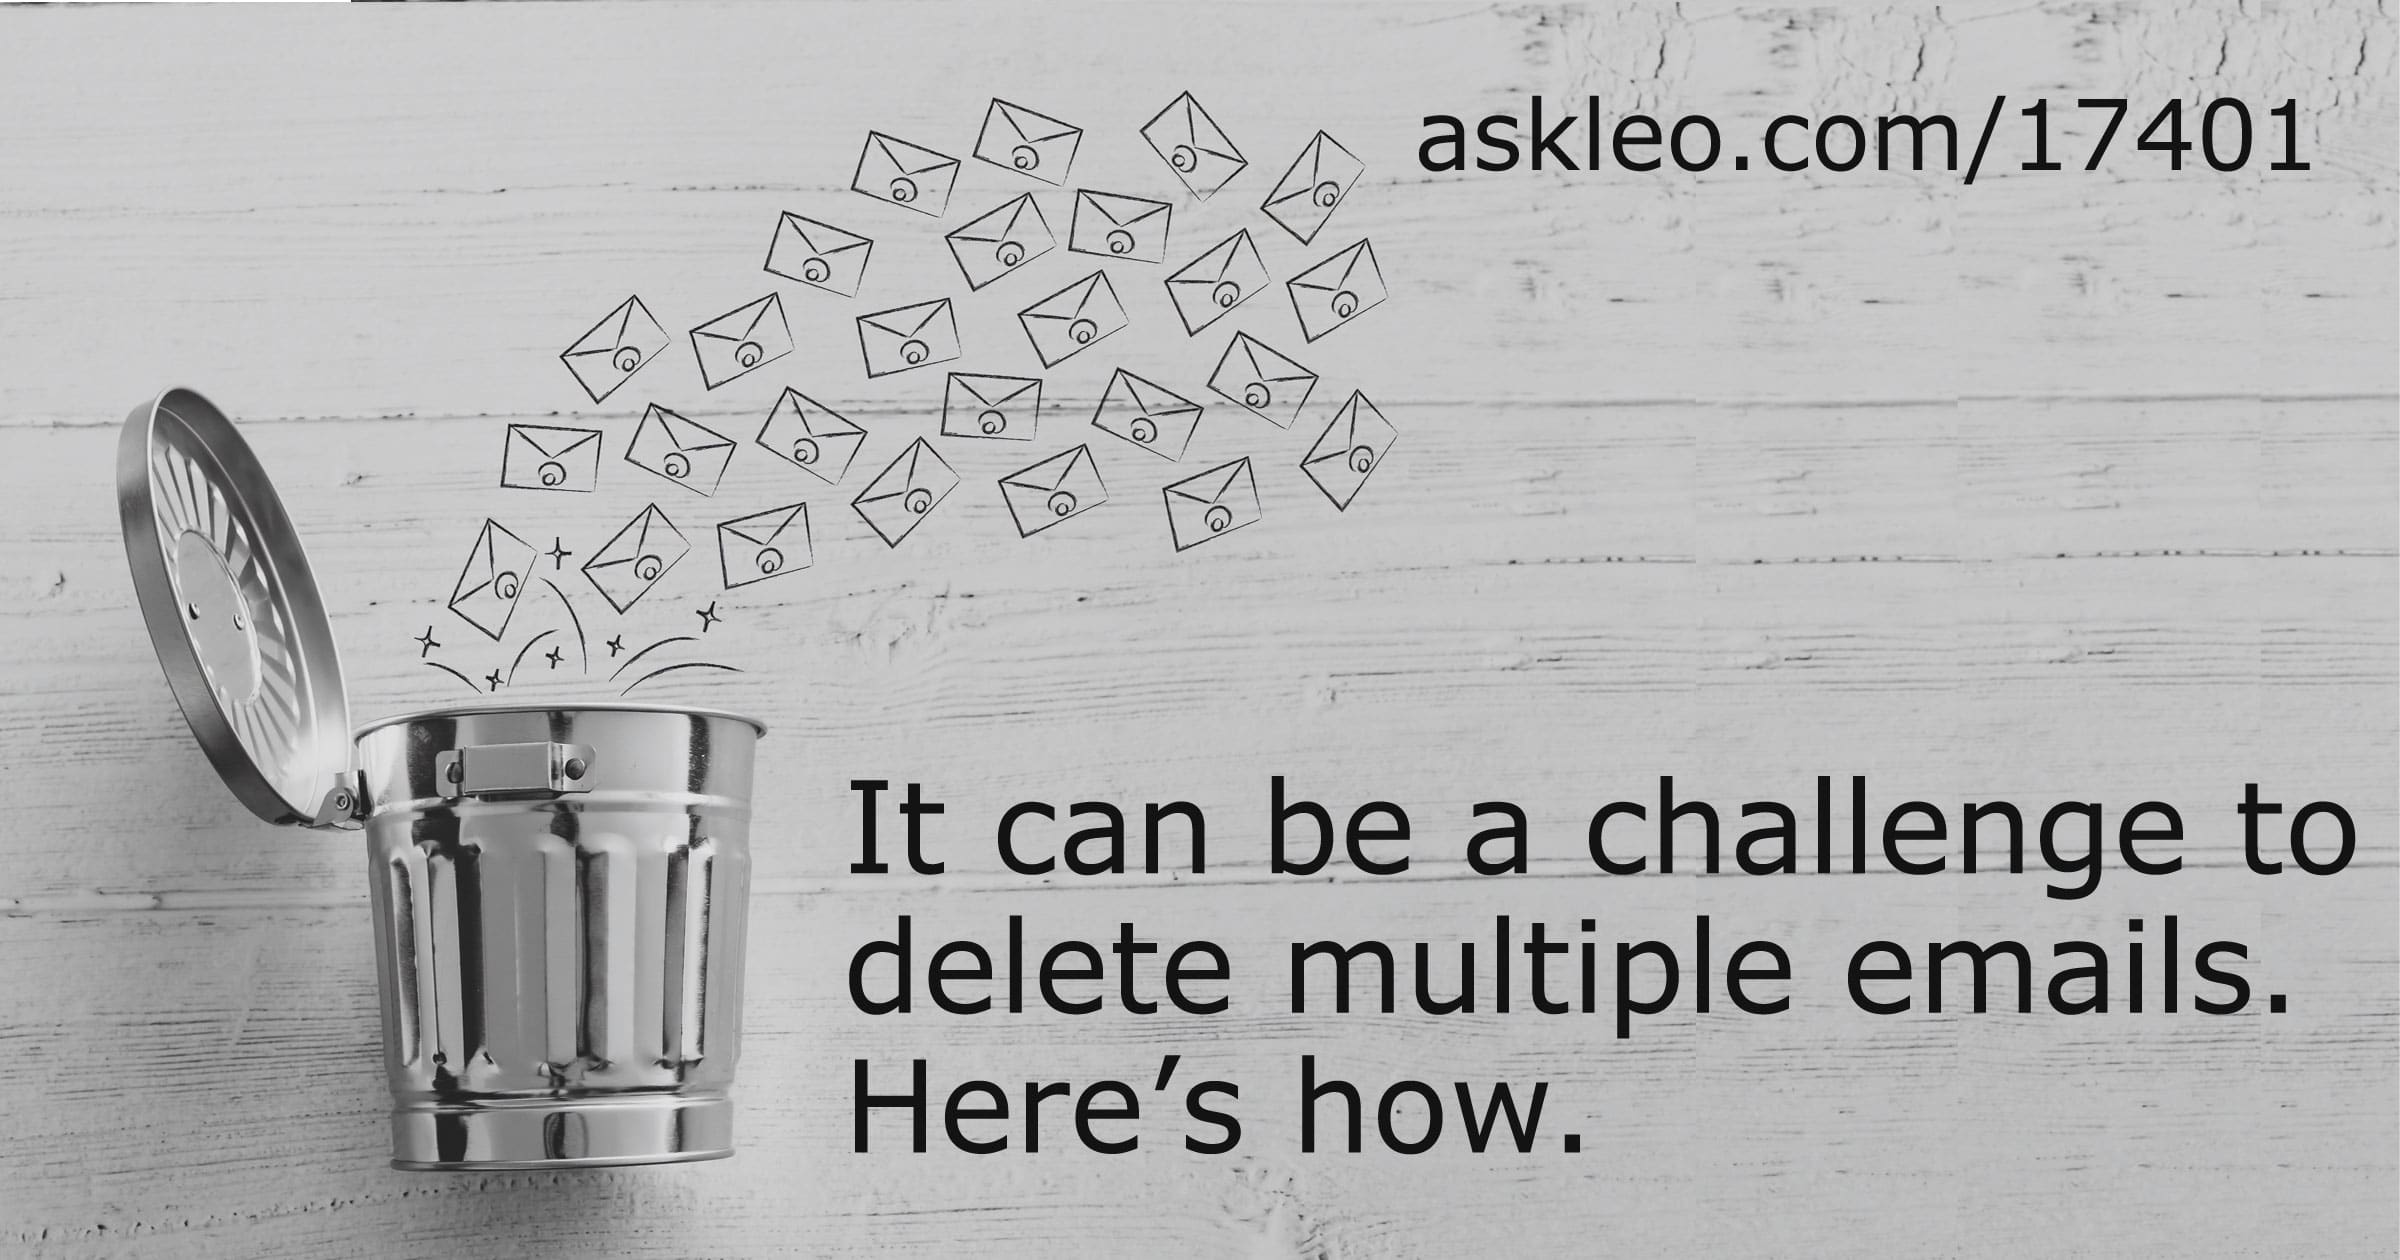 How Do I Delete Multiple Emails When I Have a Lot to Delete? - Ask Leo!